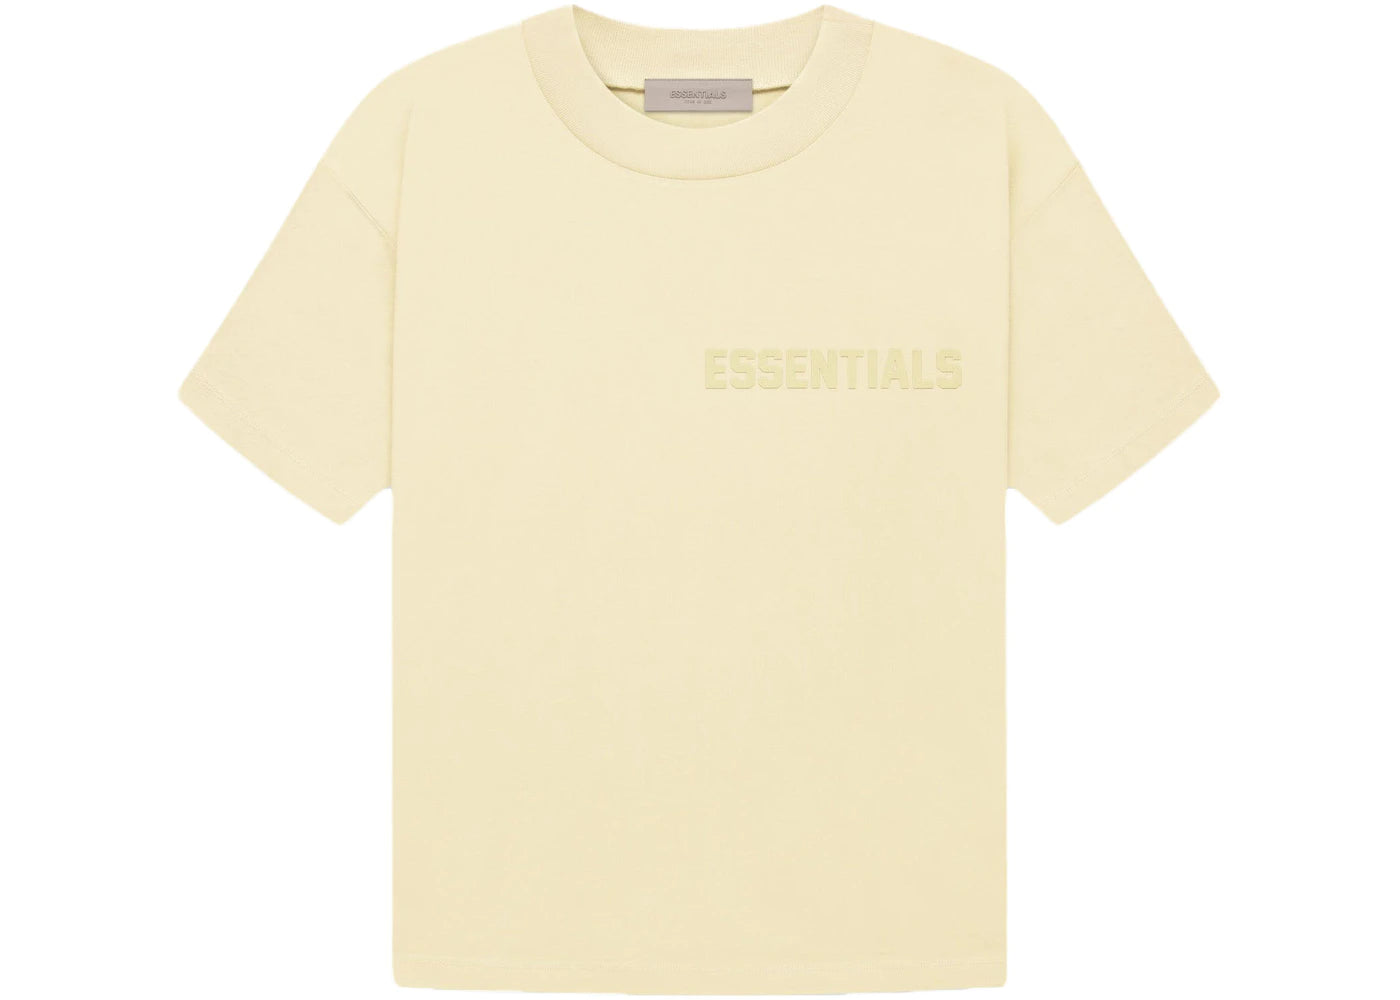 Fear of God - Essentials SS Tee 'Canary'